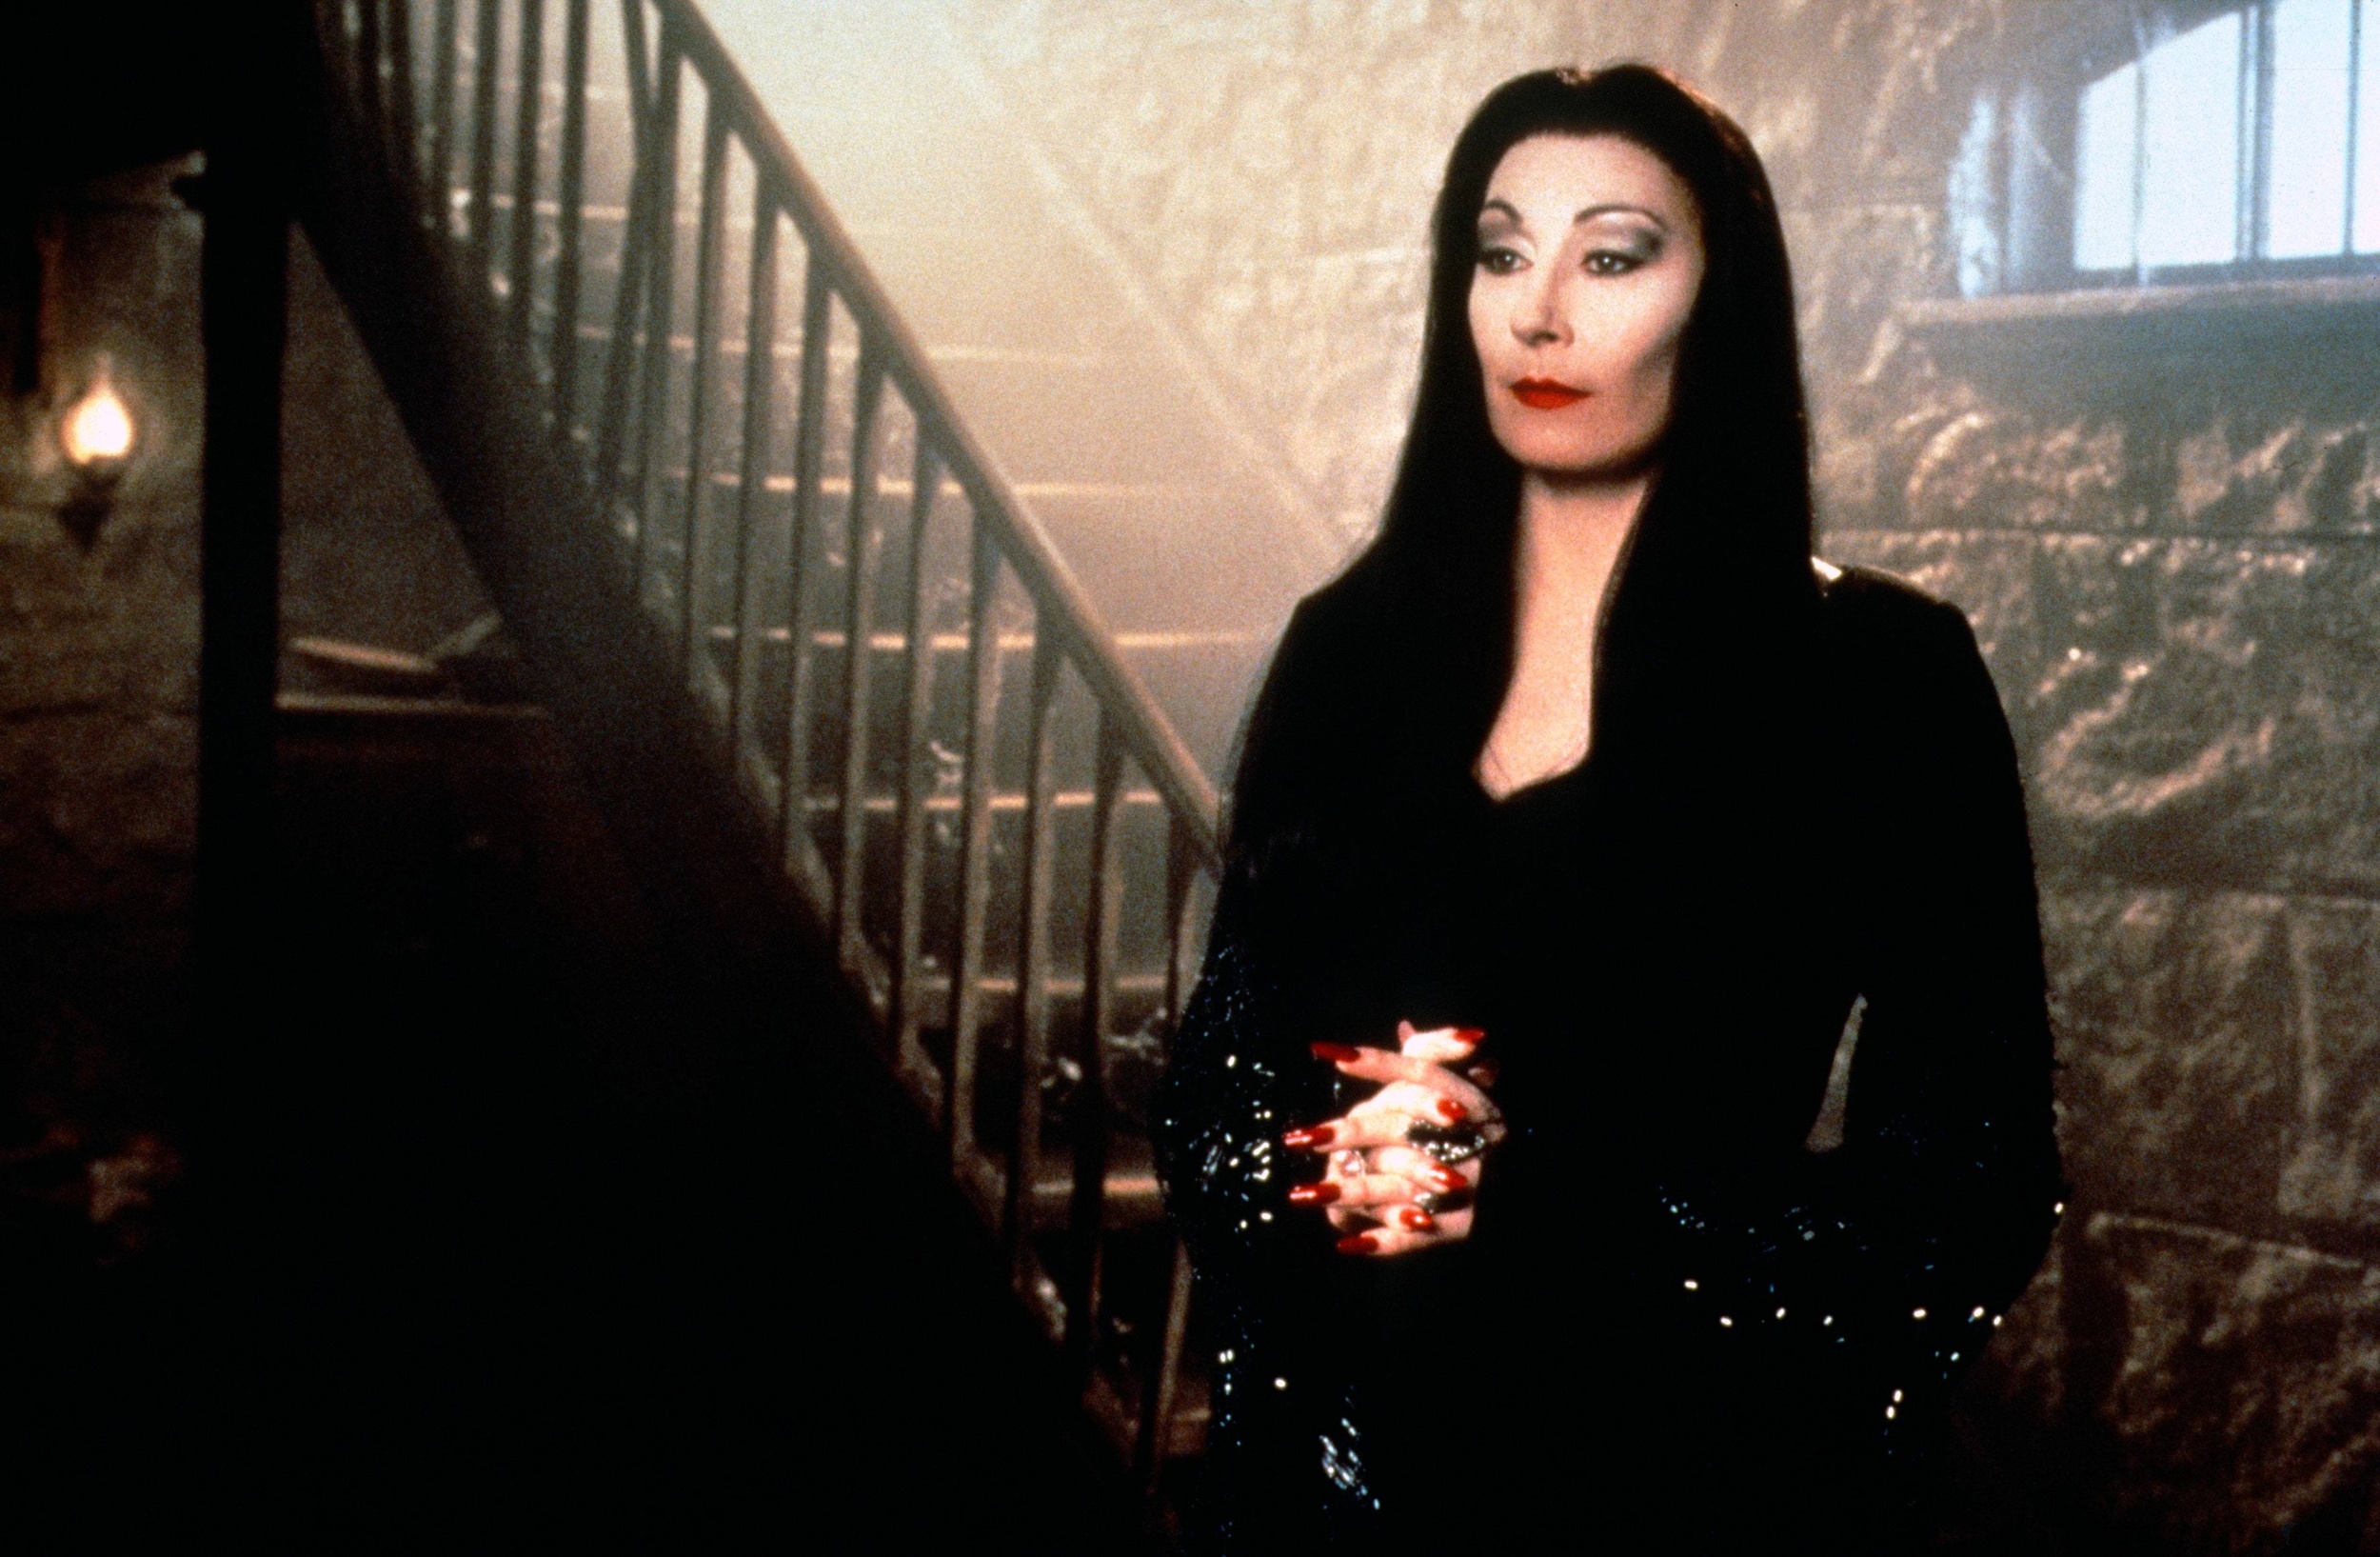 <p>Huston was a fan of Morticia, the matriarch of the Addams clan, and thus really wanted the role. However, she did not expect to be cast. In her mind, Cher was perfect for the role, and she expected Cher to get it. In the end, though, it was Huston’s role.</p><p>You may also like: <a href='https://www.yardbarker.com/entertainment/articles/20_films_that_spawned_unexpected_franchises_010824/s1__26728637'>20 films that spawned unexpected franchises</a></p>